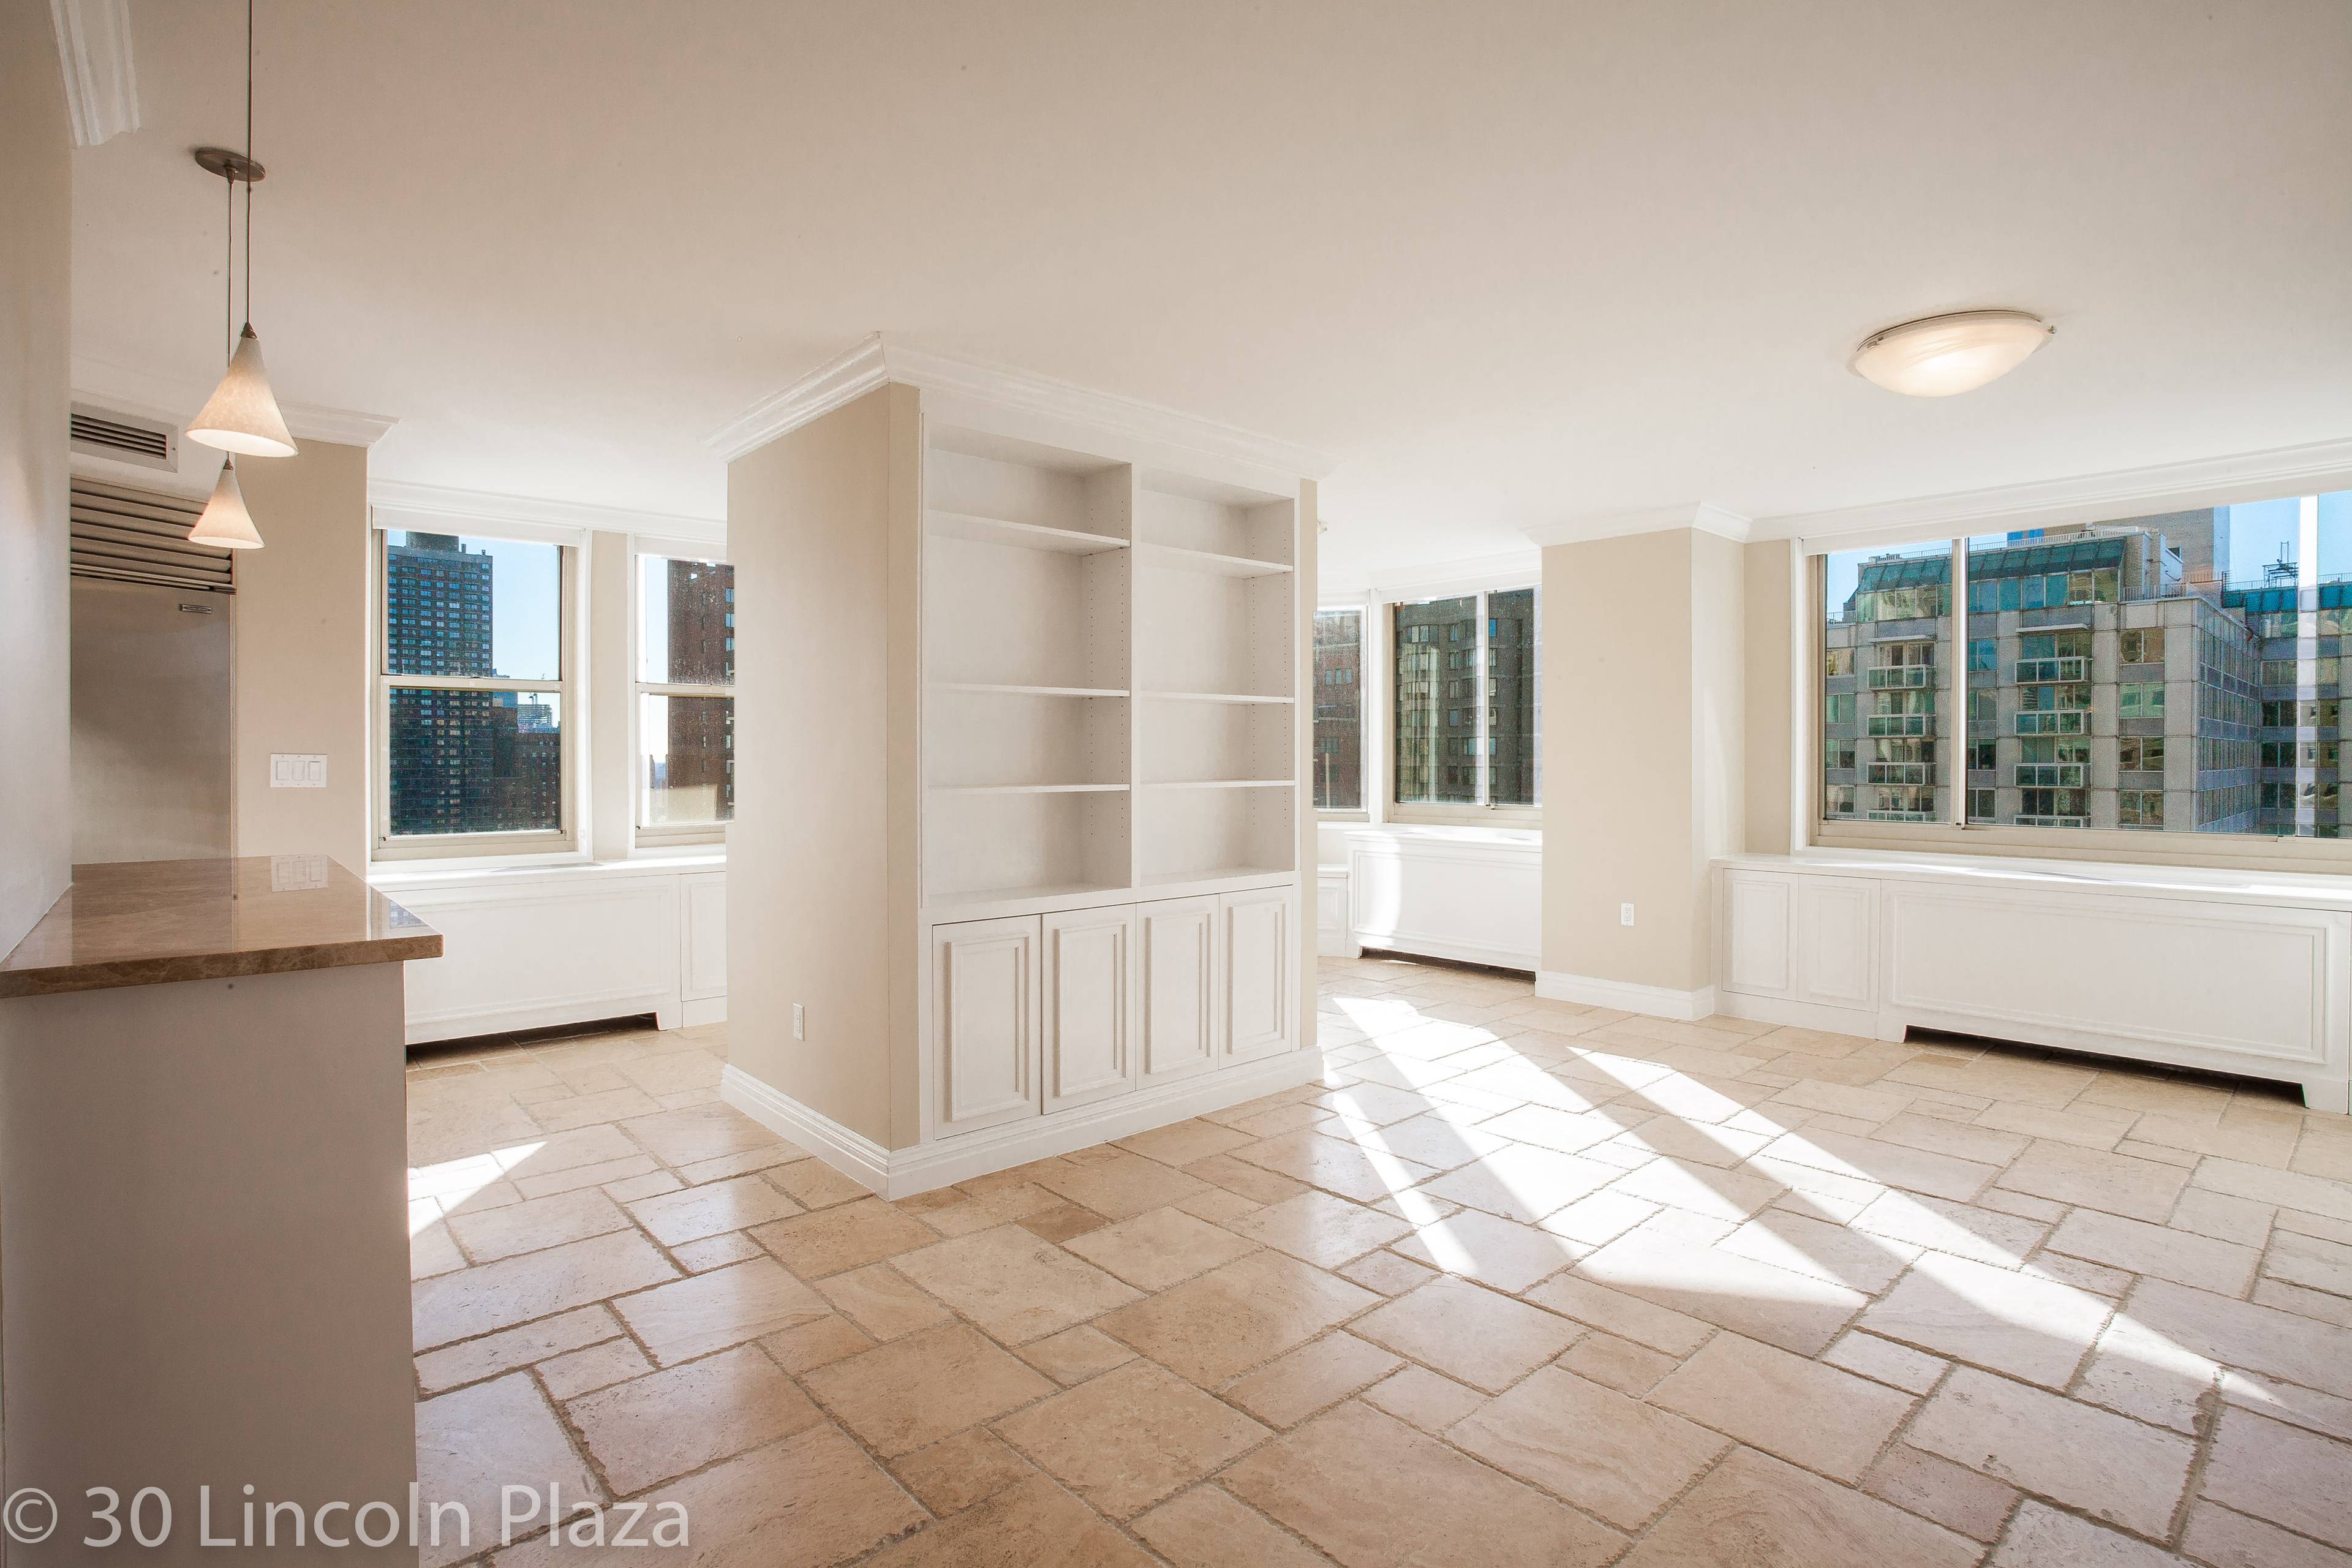 Upper West Side 1 Bedroom 1 Bathroom, WIC, Chefs kitchen, Spectacular Views, Full Service Luxury Building, Pool, No Fee